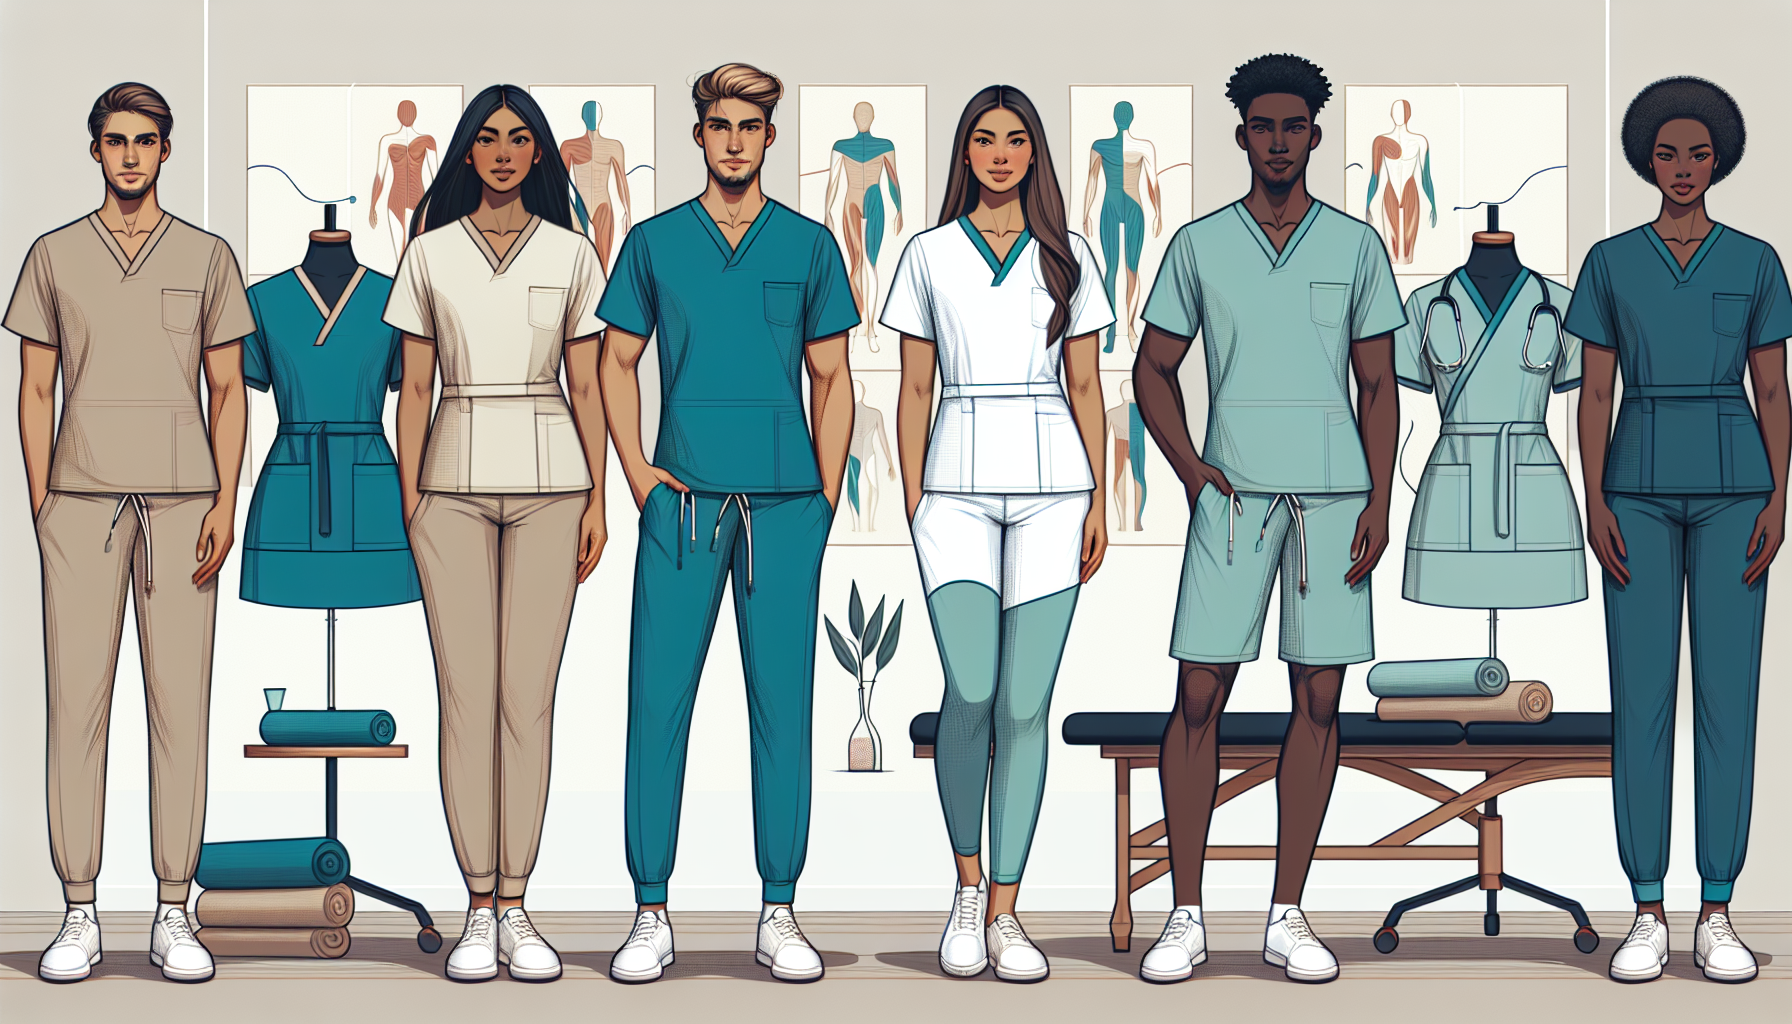 Physiotherapy Uniforms: Comfort and Functionality